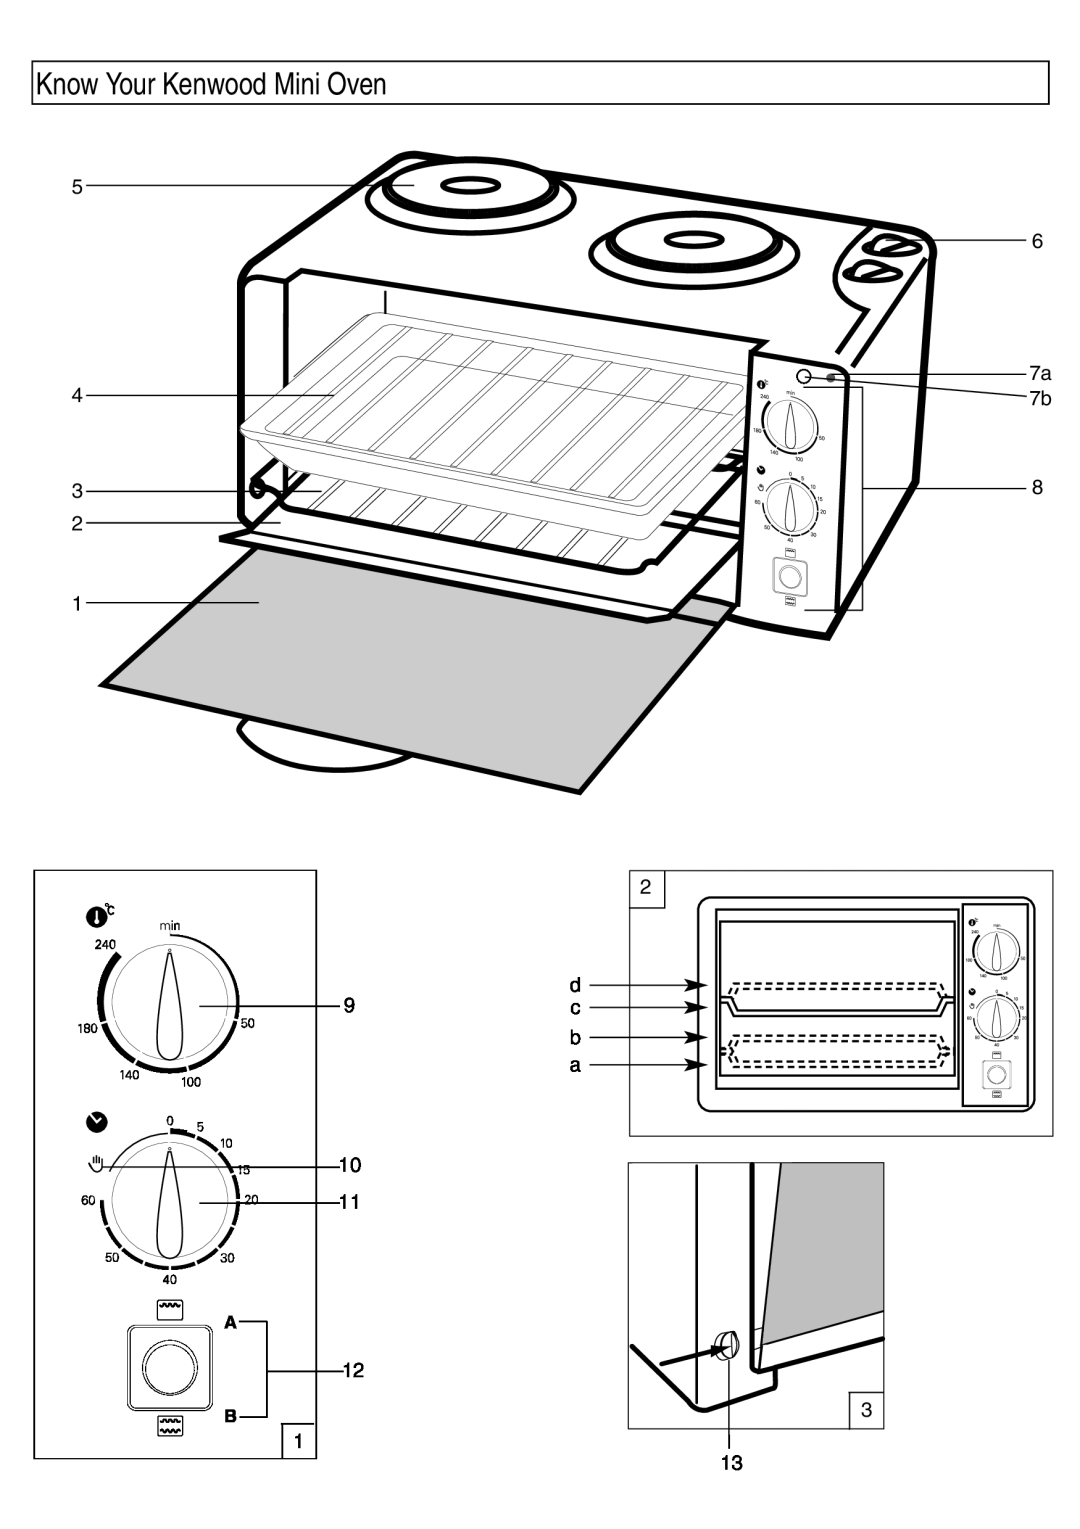 Kenwood manual Know Your Kenwood Mini Oven, 7a 7b 